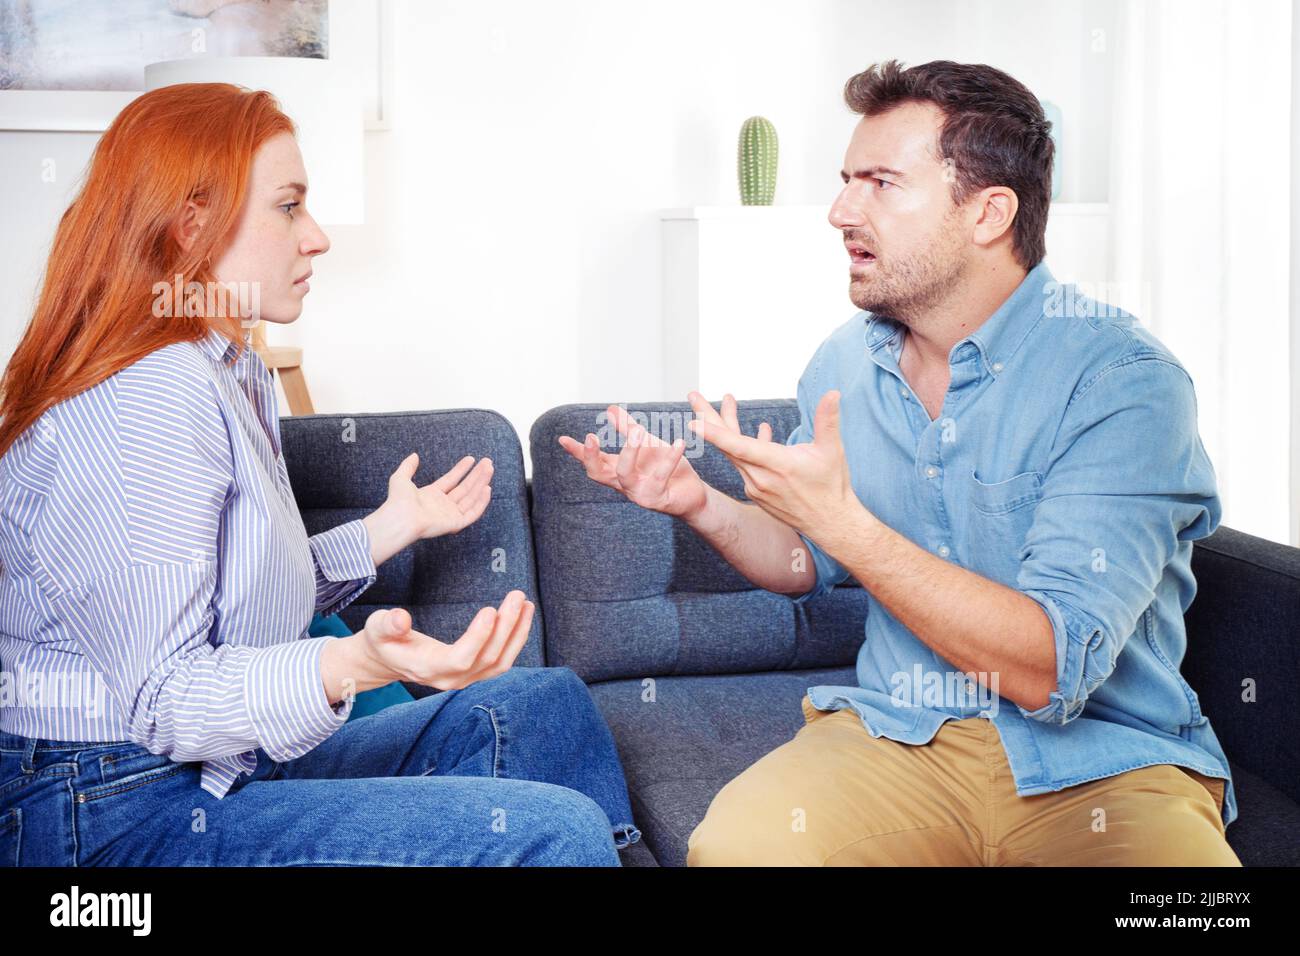 Upset and sad couple arguing with each other on sofa Stock Photo